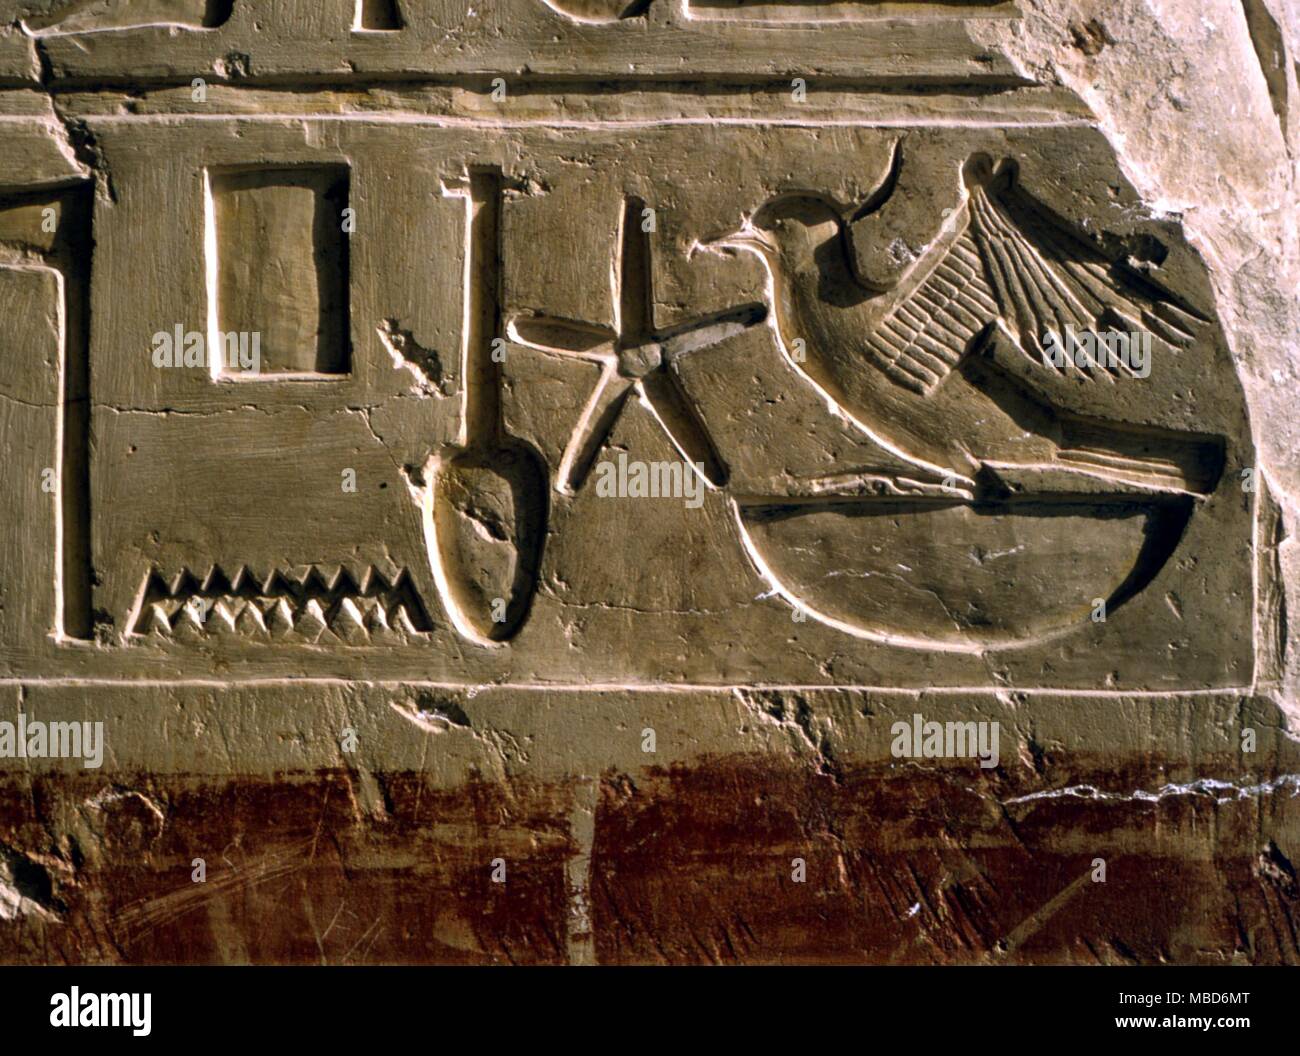 EGYPTIAN MYTHOLOGY - Alphabets - Egyptian hieroglyphics from the ancient Temple of Amun at Karnak (the ancient Thebes) Luxor in Egypt. Among the symbols is the sba star. Stock Photo